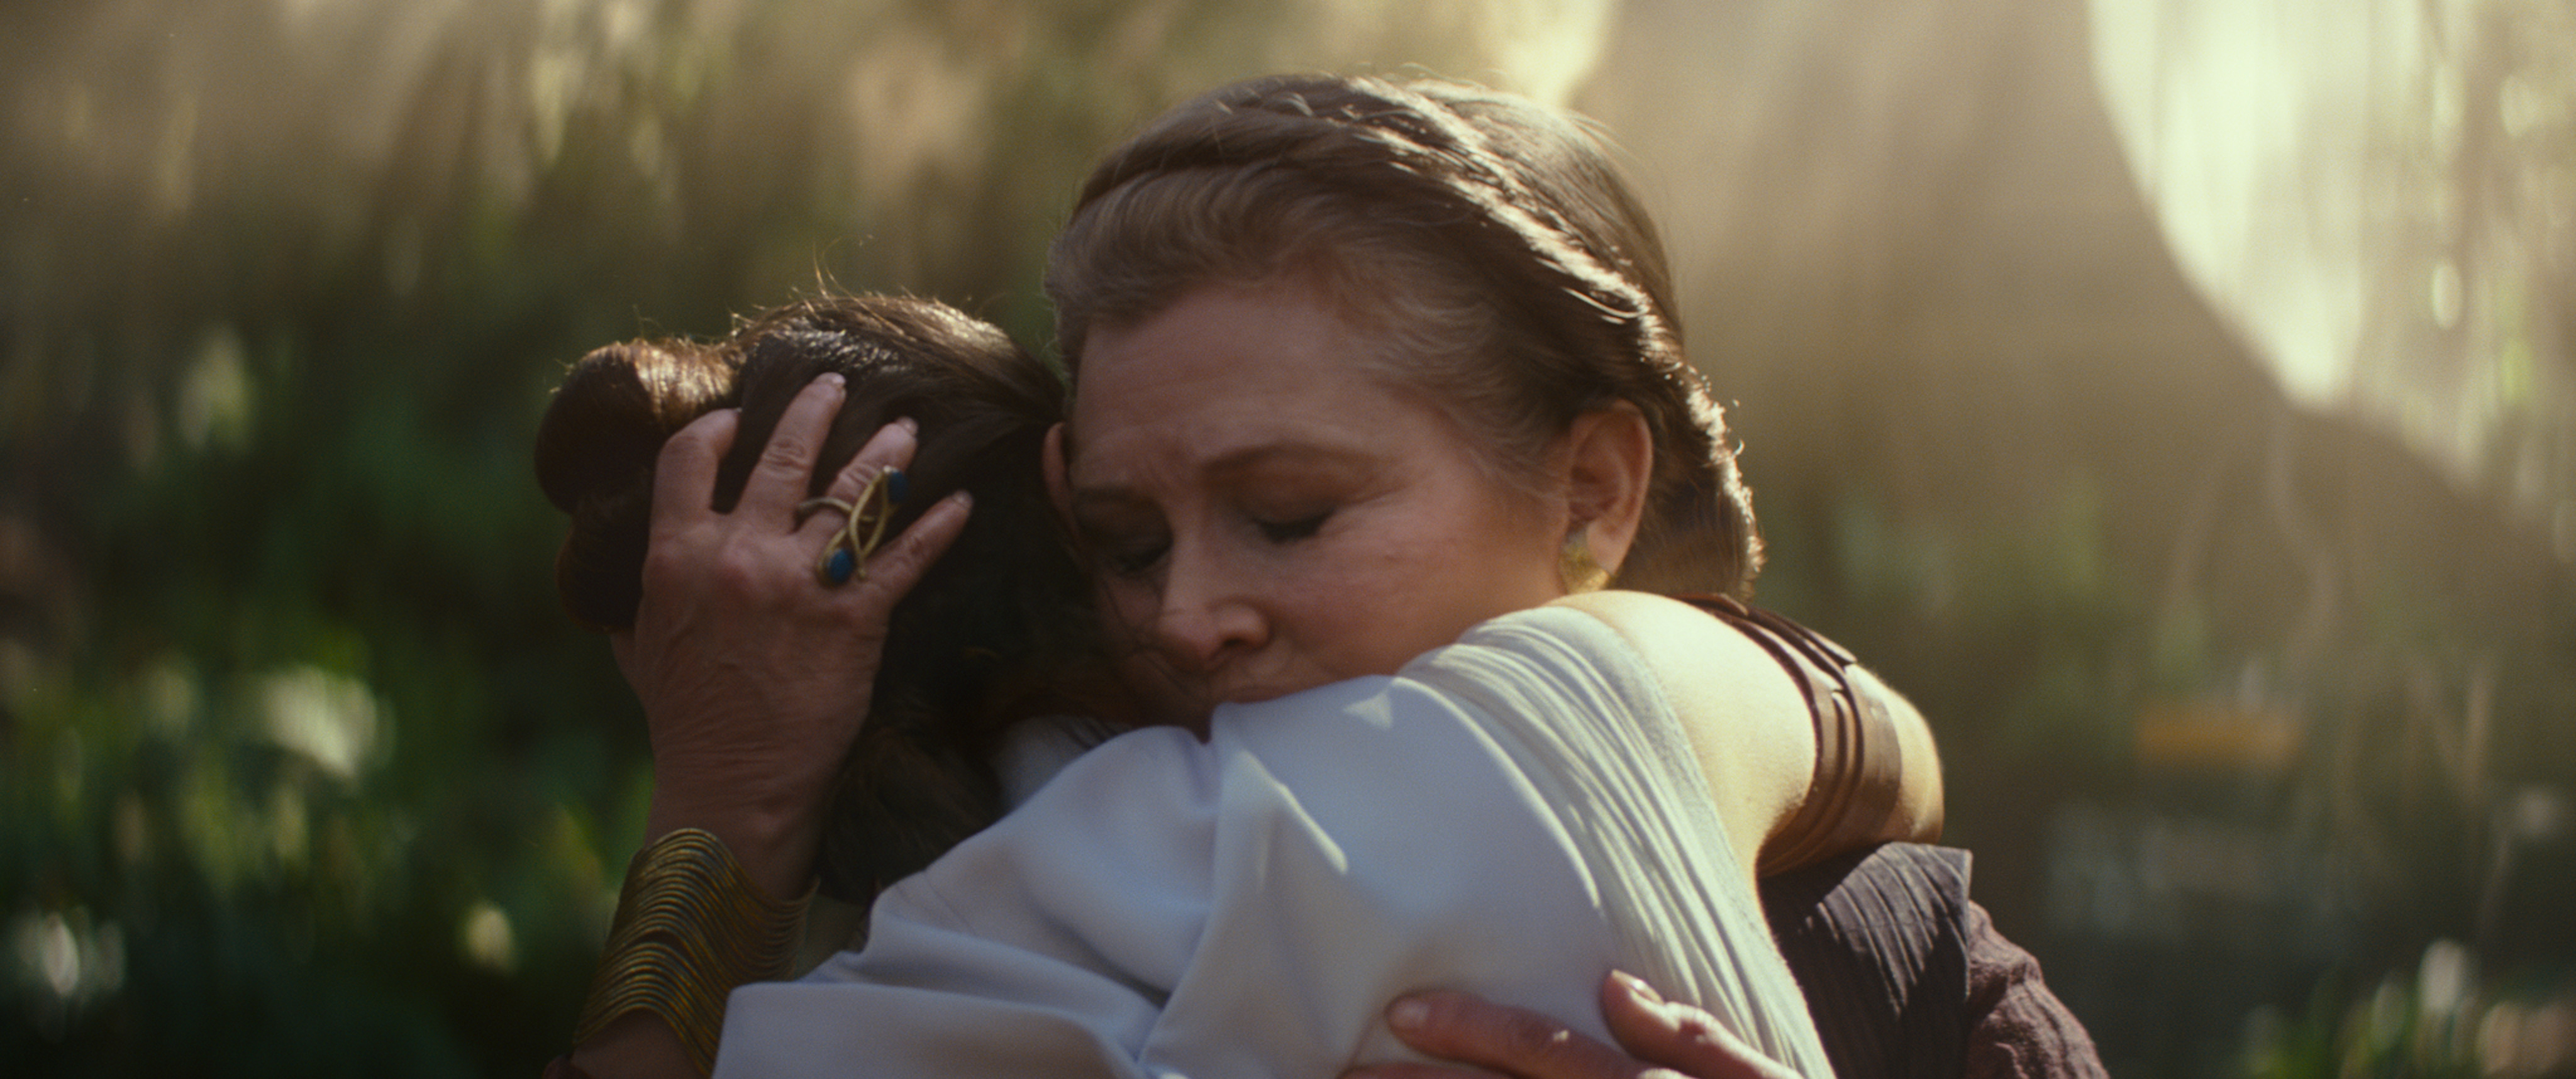 General Leia Organa (Carrie Fisher) and Rey (Daisy Ridley) in STAR WARS:  THE RISE OF SKYWALKER (Lucasfilm Ltd.)